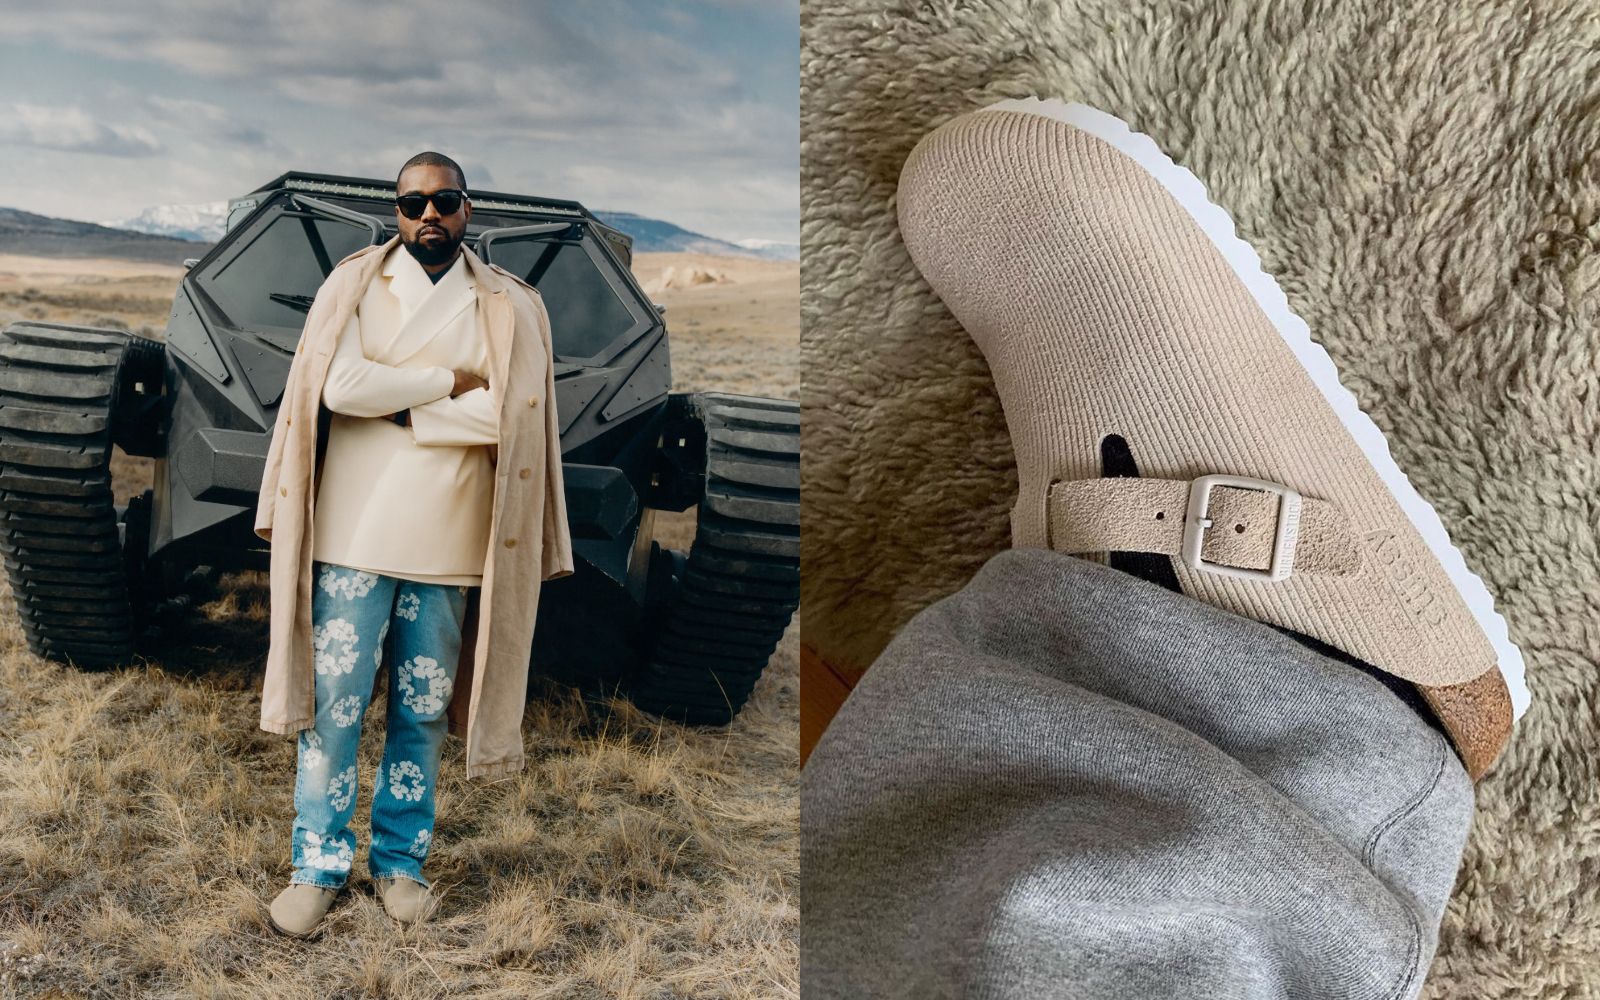 Birkenstock launches street style campaign for Fall/Winter 2022